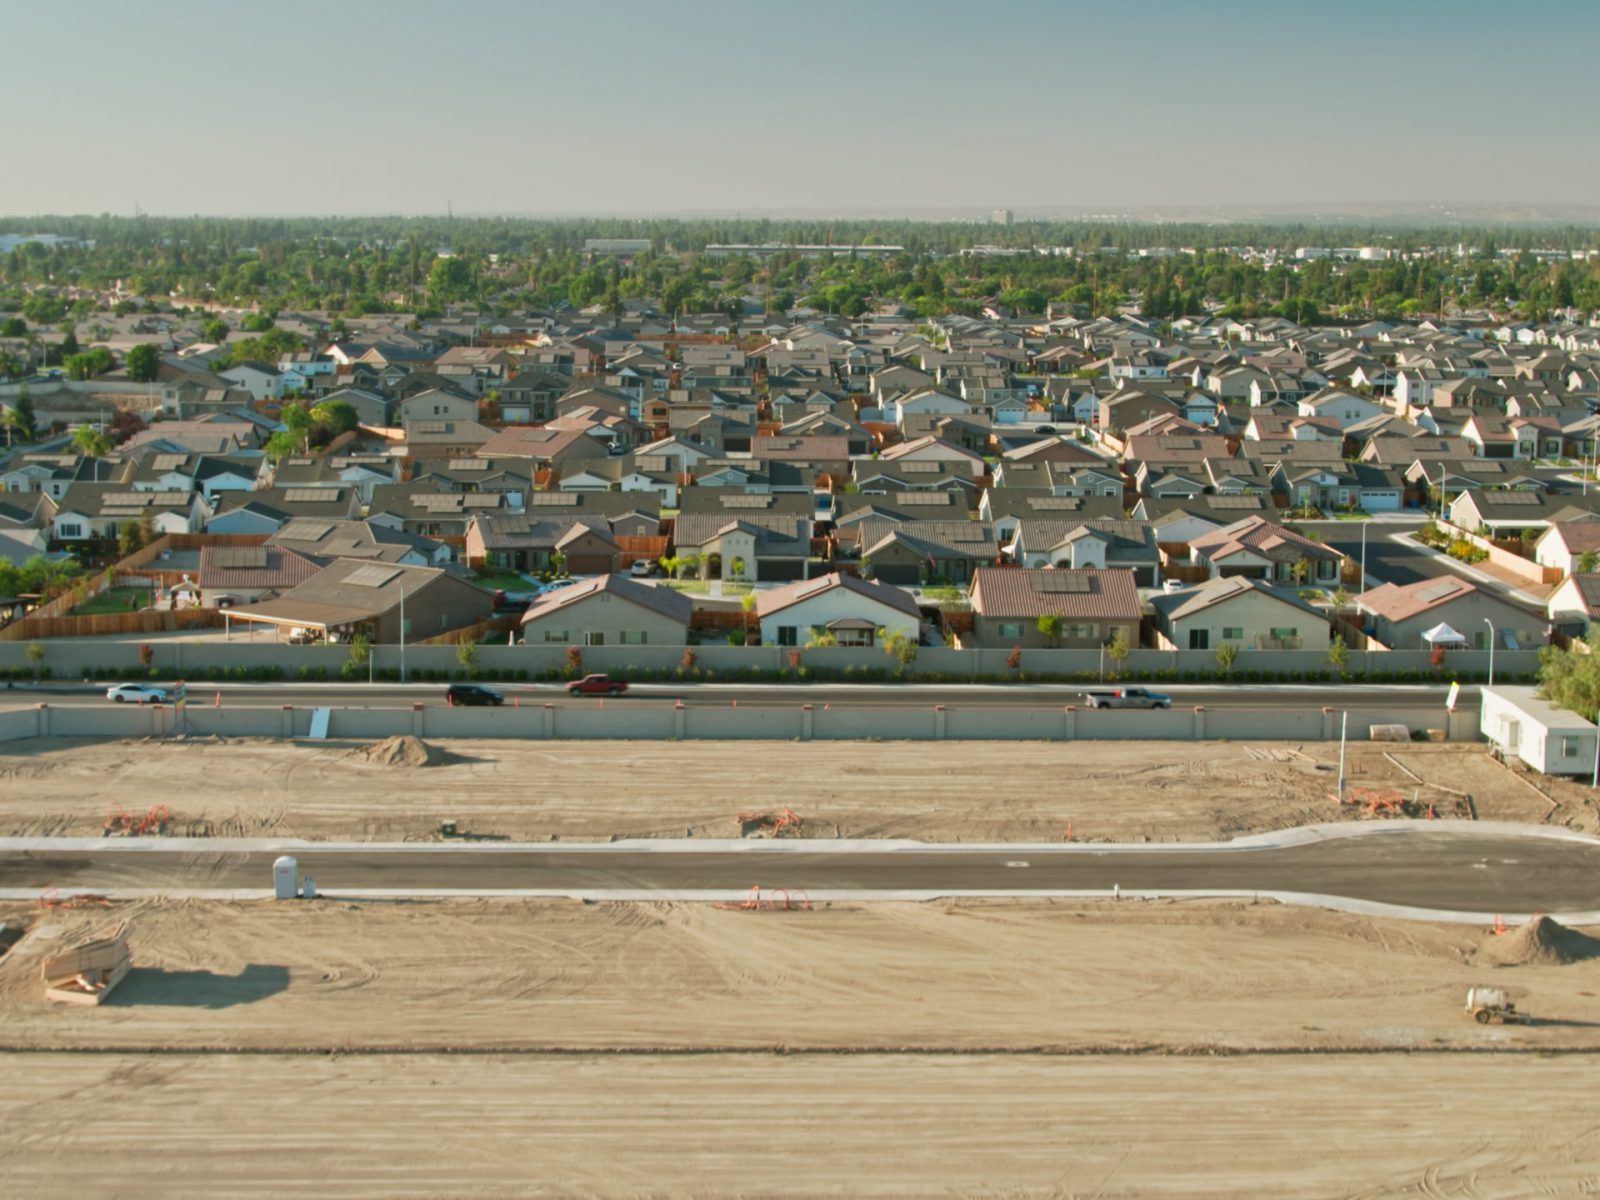 Drone shot flying over land graded for new construction and established residential streets on the edge of Bakersfield, California, where the suburbs are encroaching onto Central Valley farmland. 

Airspace authorization was obtained from the FAA for this operation.